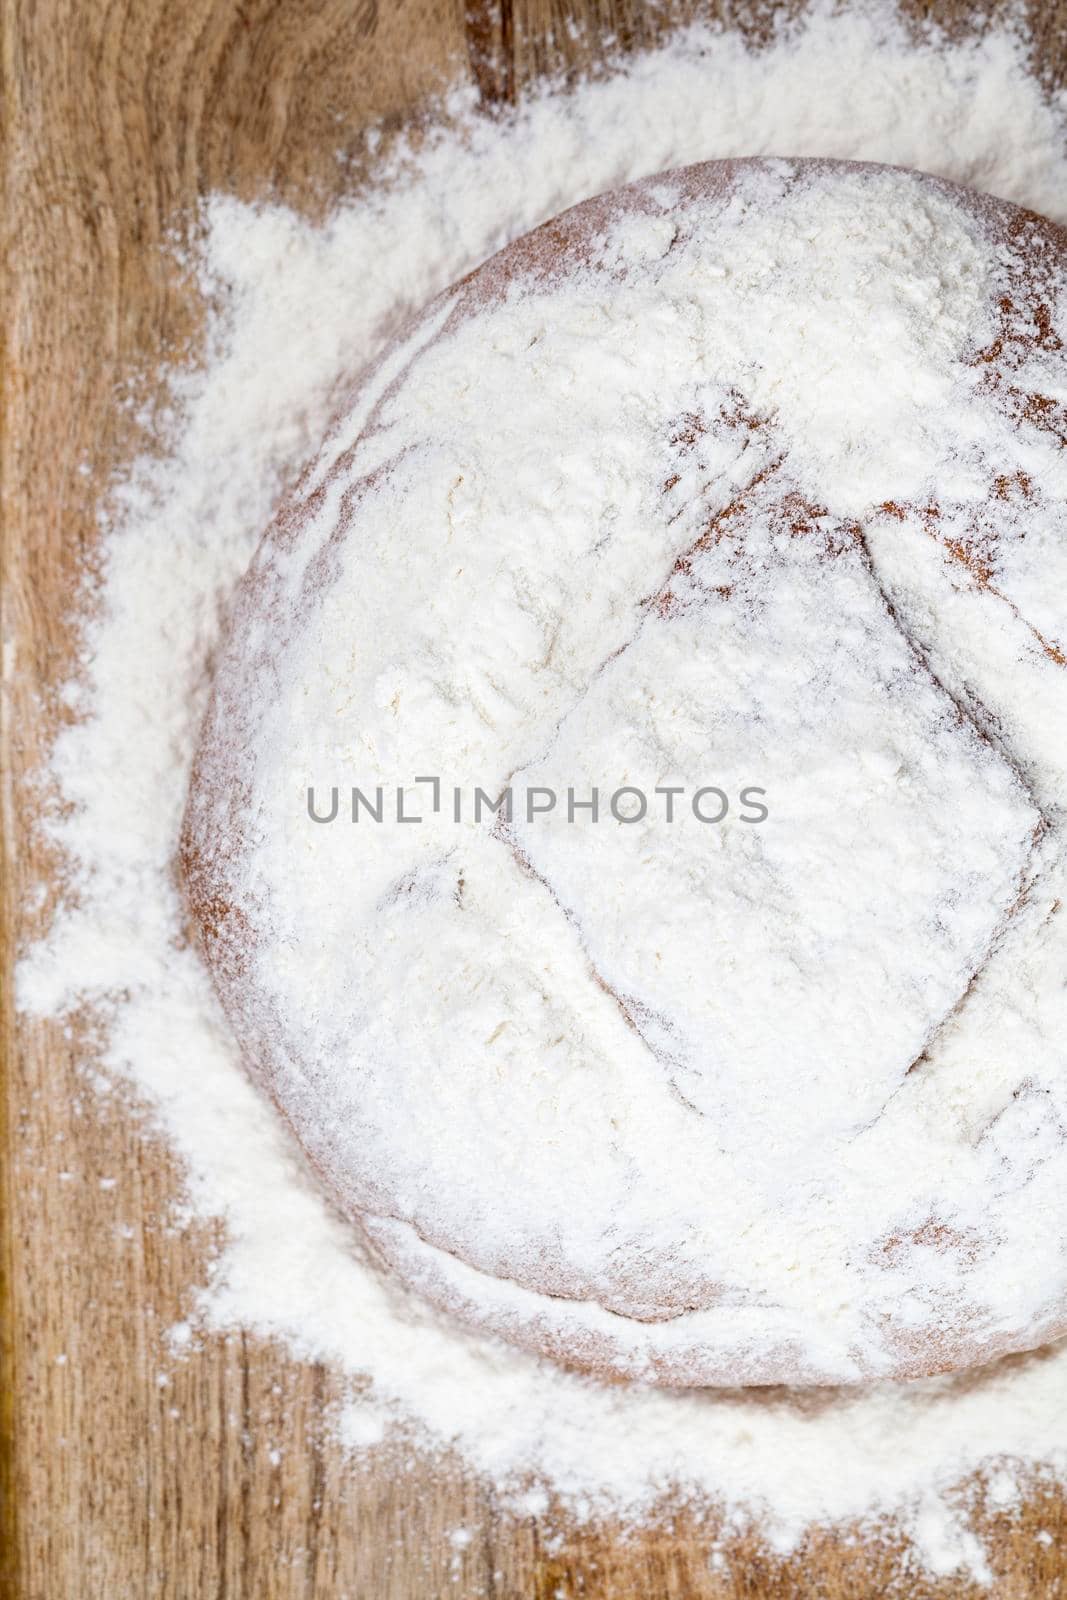 sprinkled with white flour homemade fresh bread lying on a wooden board. photo close-up, top view